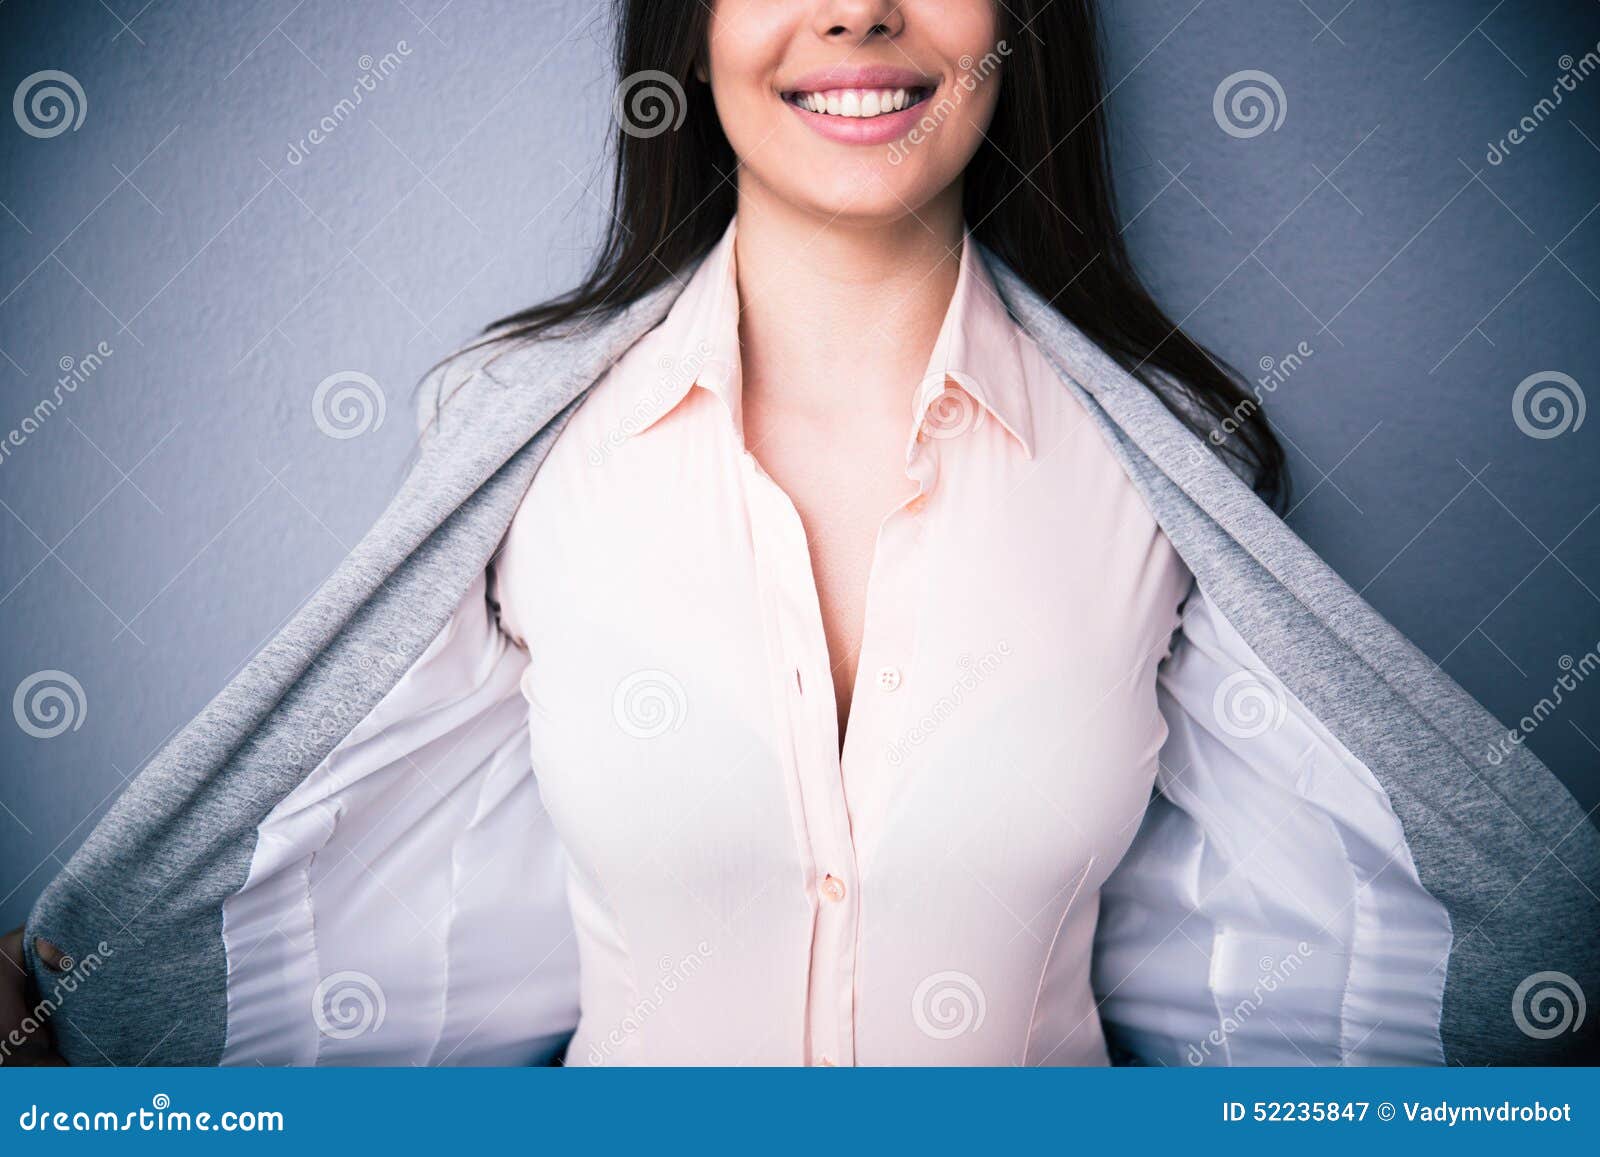 Fotografia do Stock: Close up of breast of woman presenting her